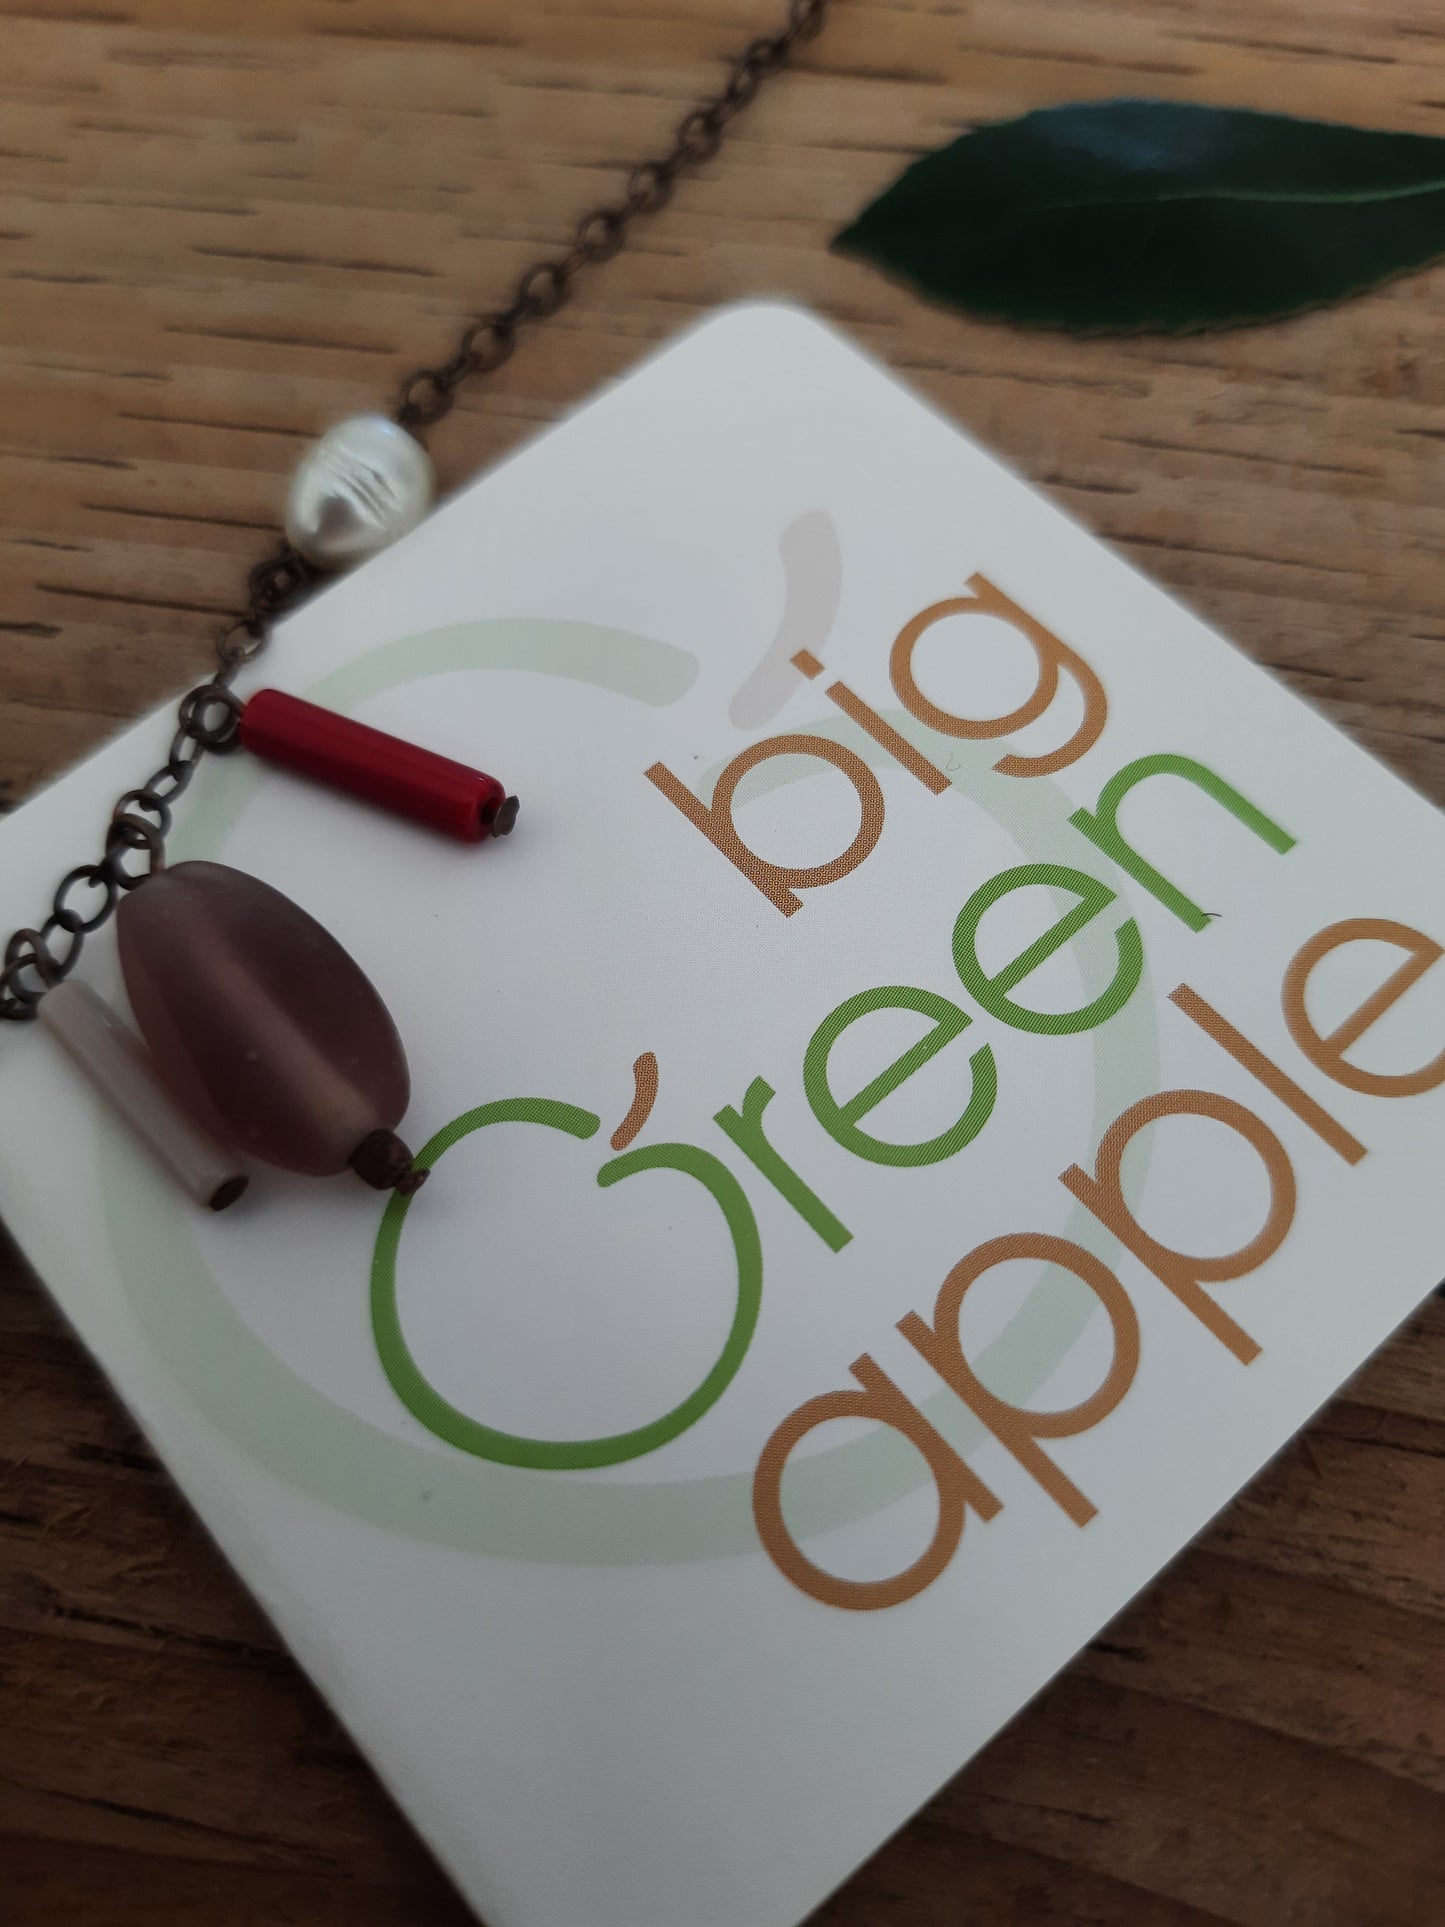 Necklaces, Fair Trade Jewellery, Gifts For Mom, Fair Trade Jewellery, Fair Trade Products, Ethical Gifts, BIG GREEN APPLE